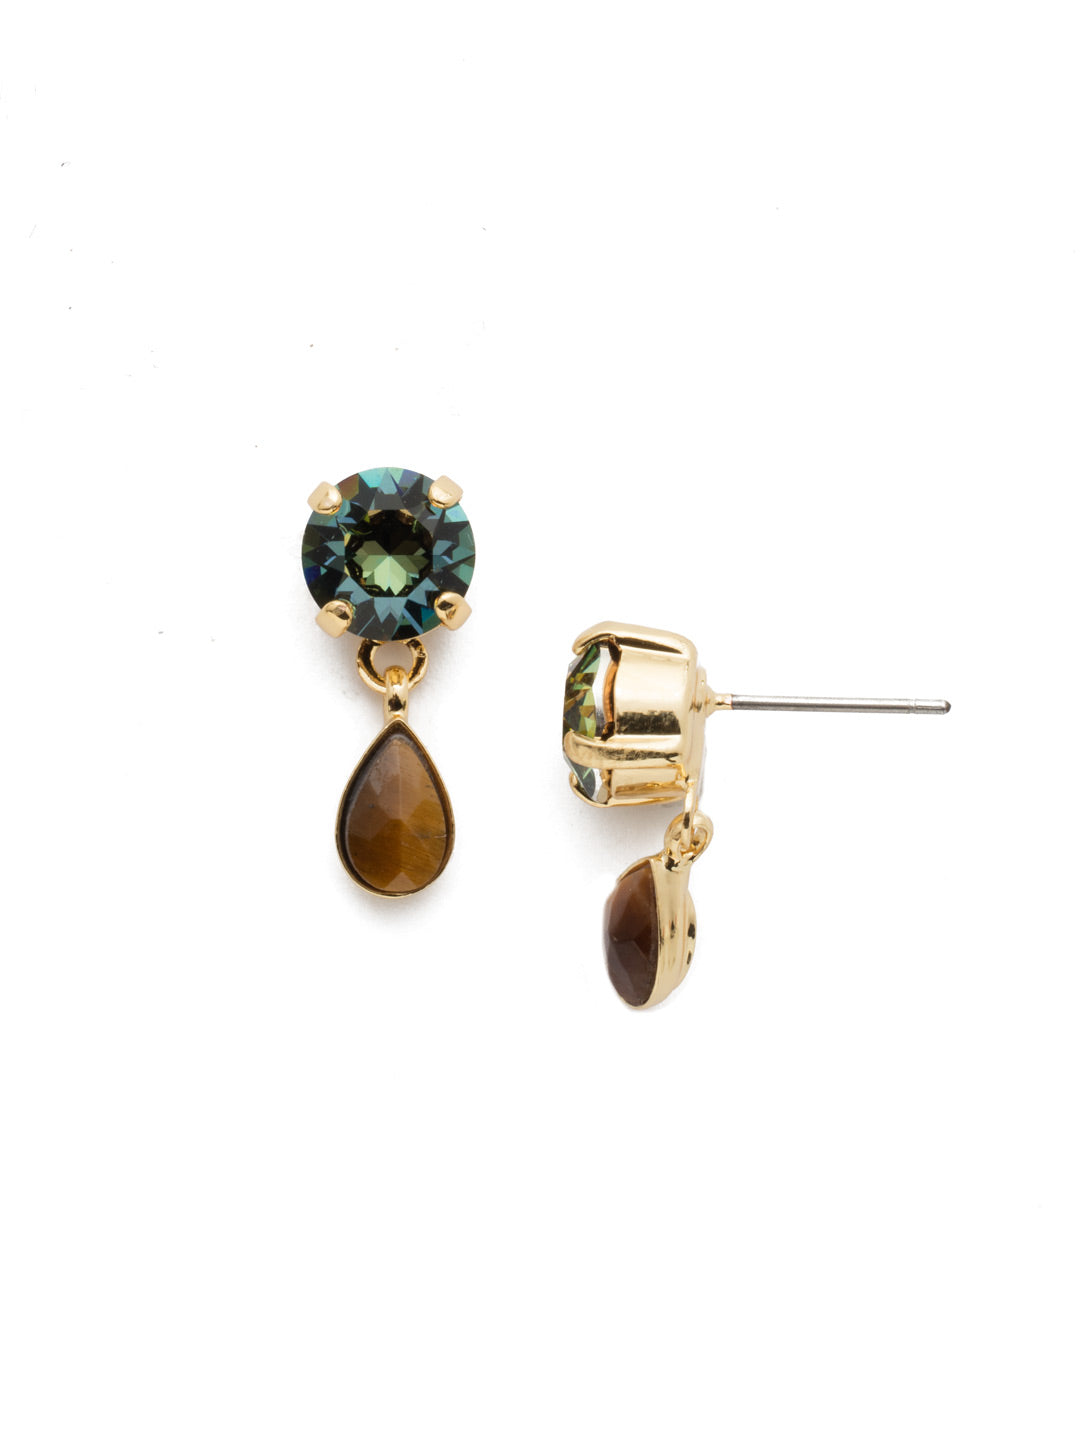 Quincey Dangle Earrings - EET160BGCSM - The Quincey Dangle Earrings are simply sophisticated. The signature round crystal posts are taken up a notch when they drip a pear-shaped stone. From Sorrelli's Cashmere collection in our Bright Gold-tone finish.